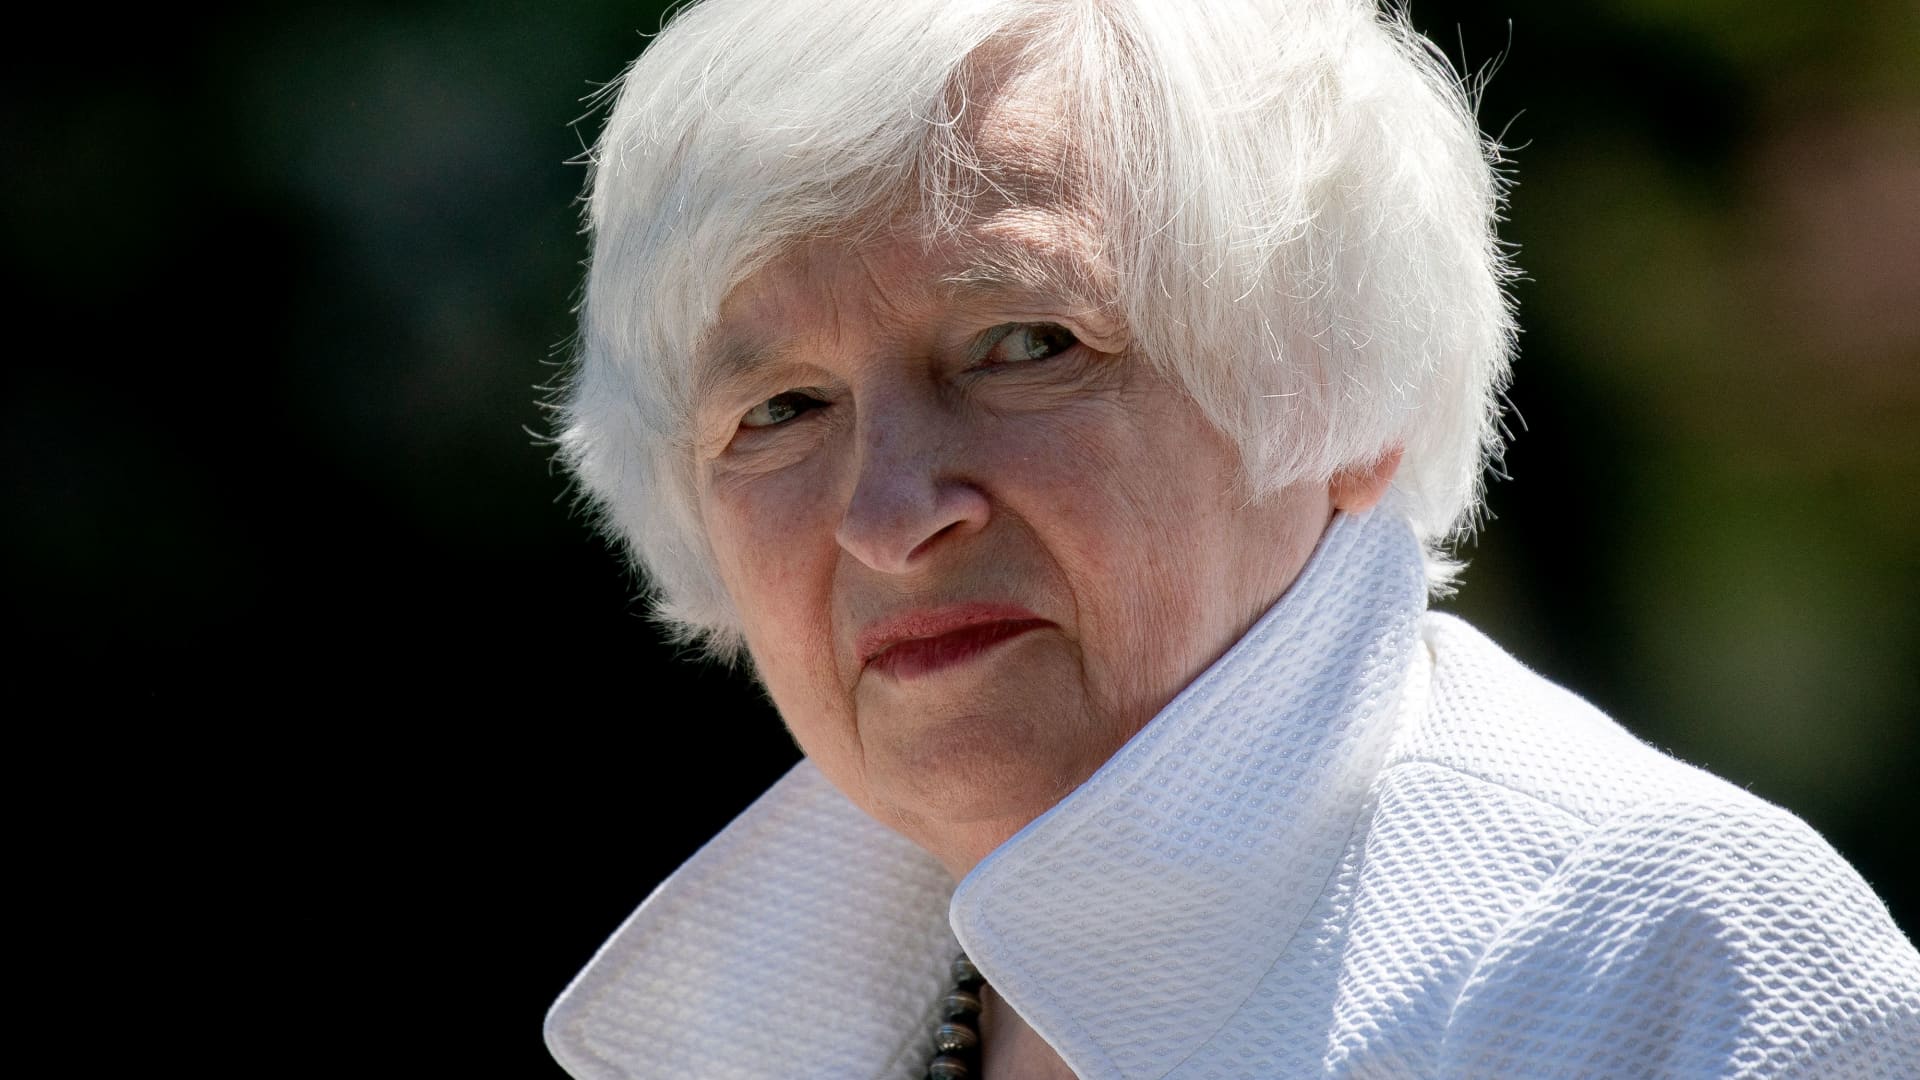 Yellen warns inflation in the U.S. is ‘unacceptably high’